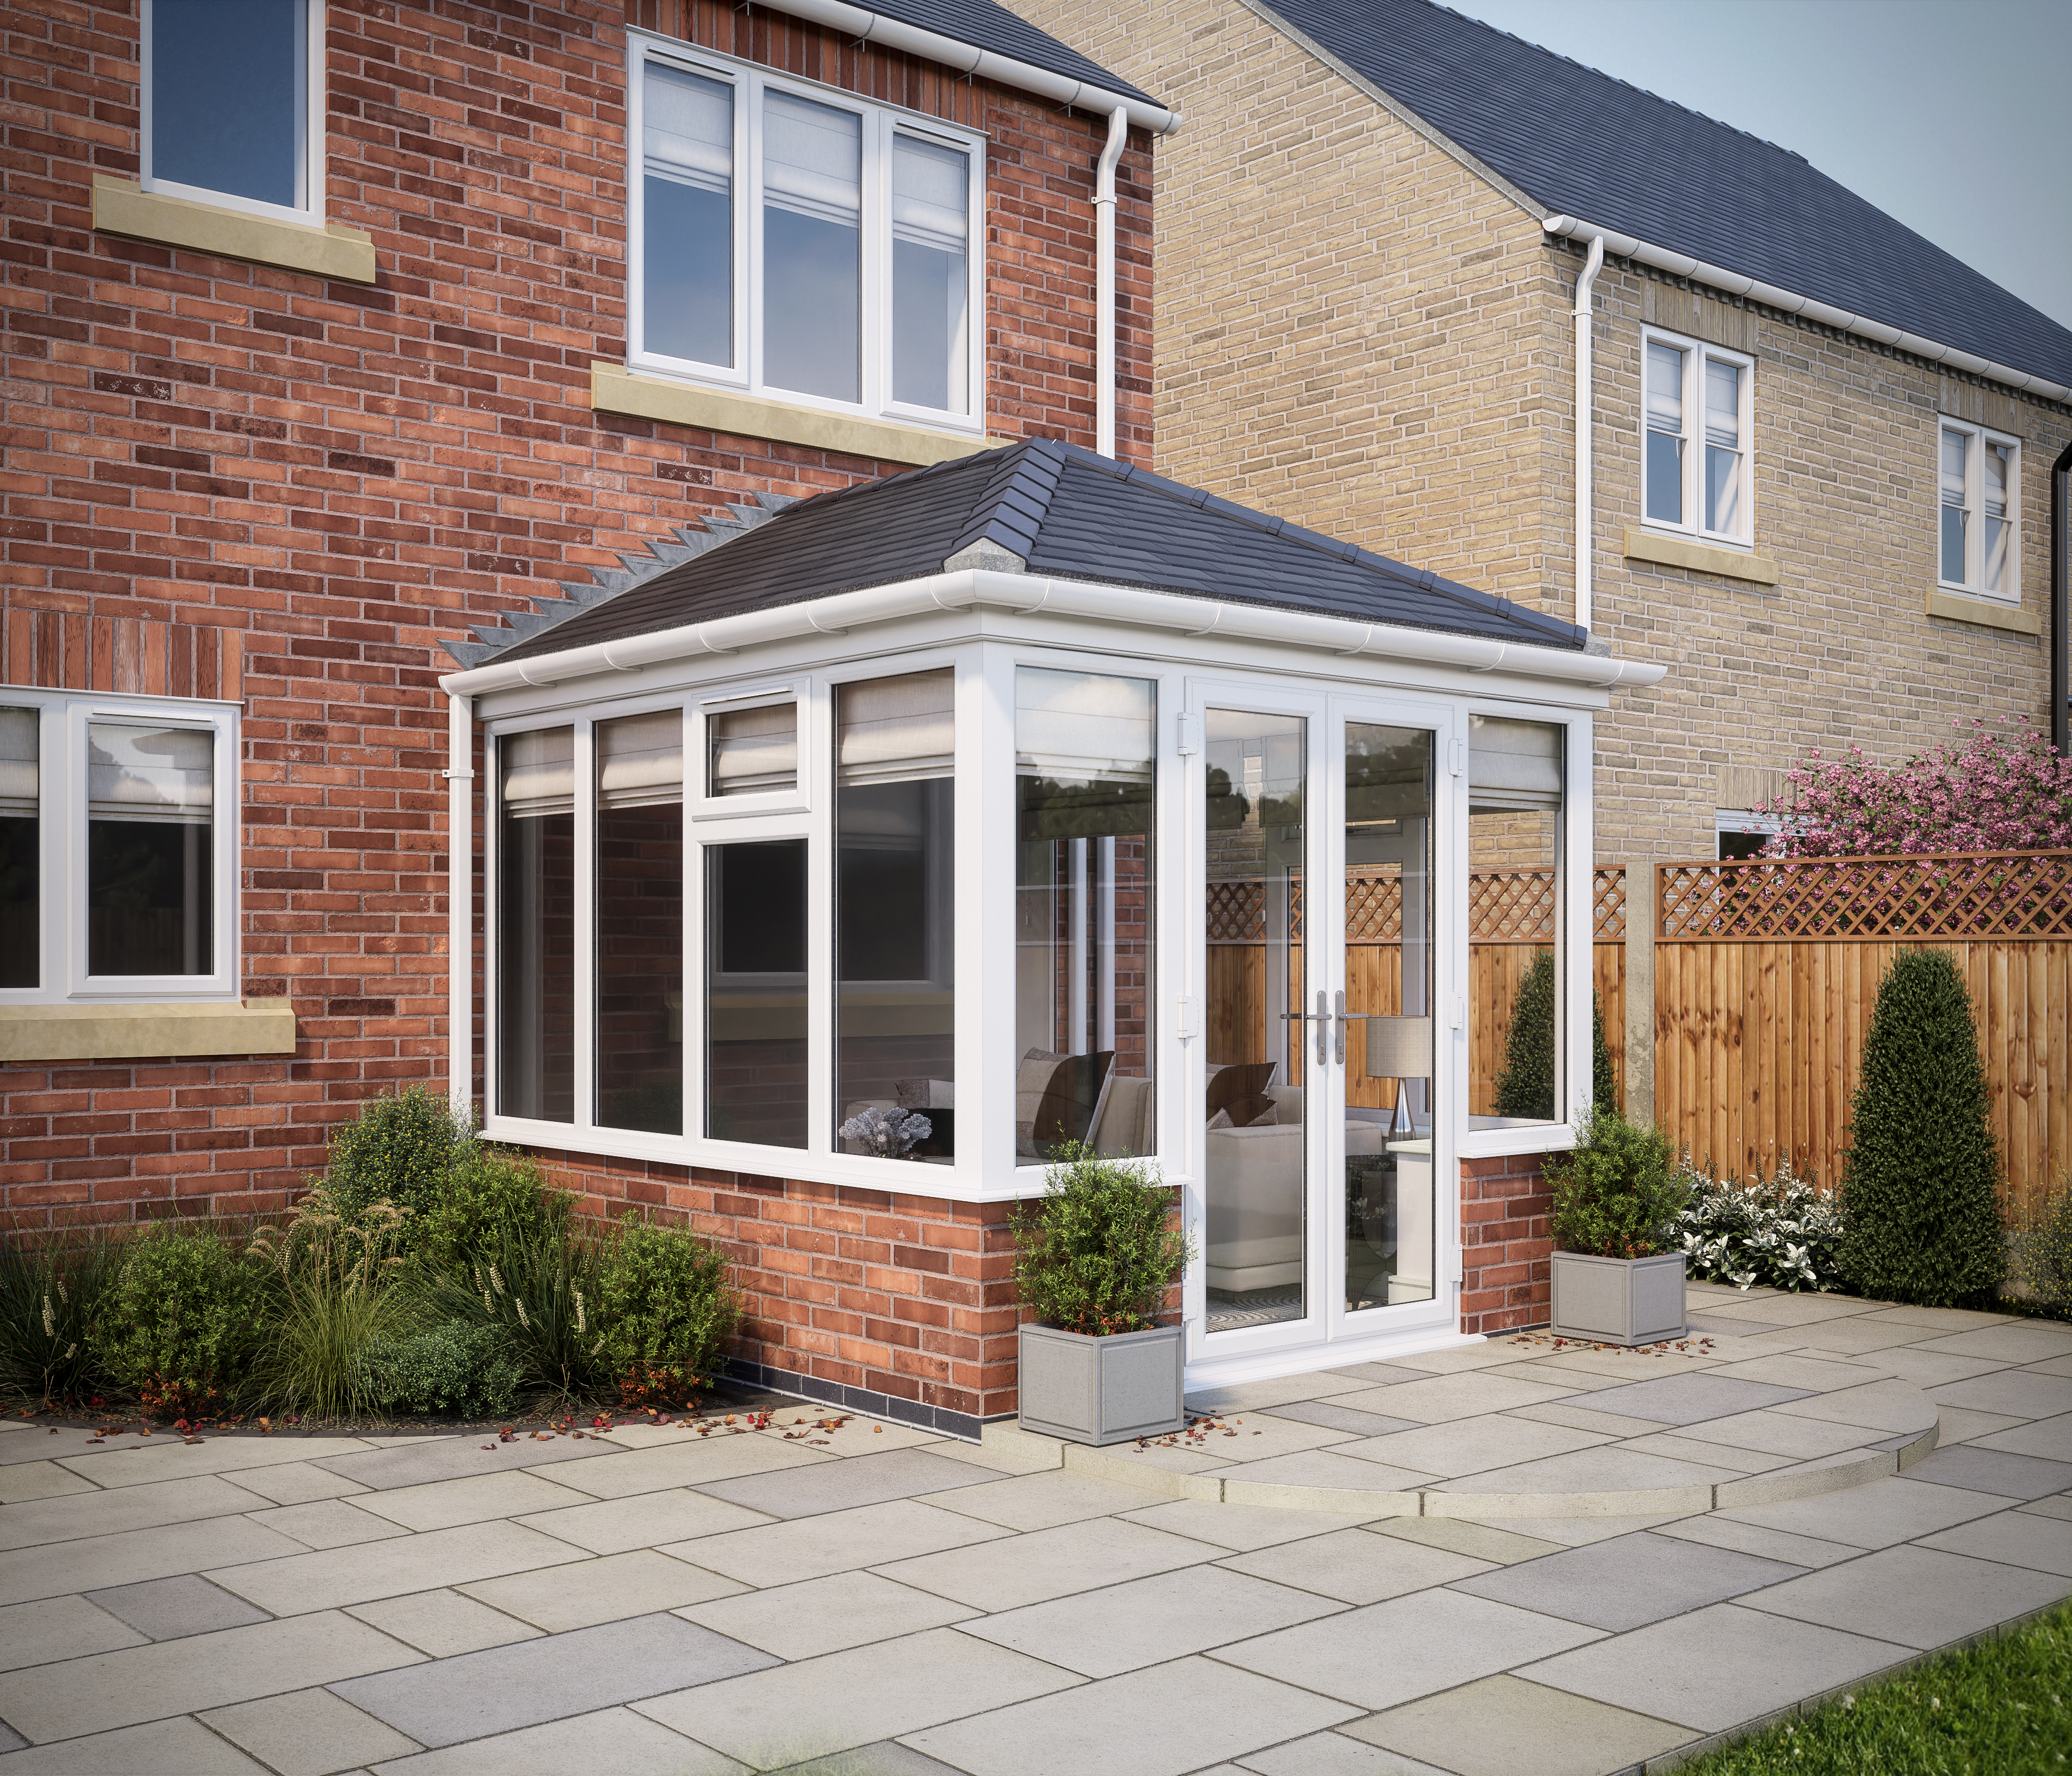 Image of SOLid Roof Edwardian Conservatory White Frames Dwarf Wall with Titanium Grey Tiles - 13 x 13ft